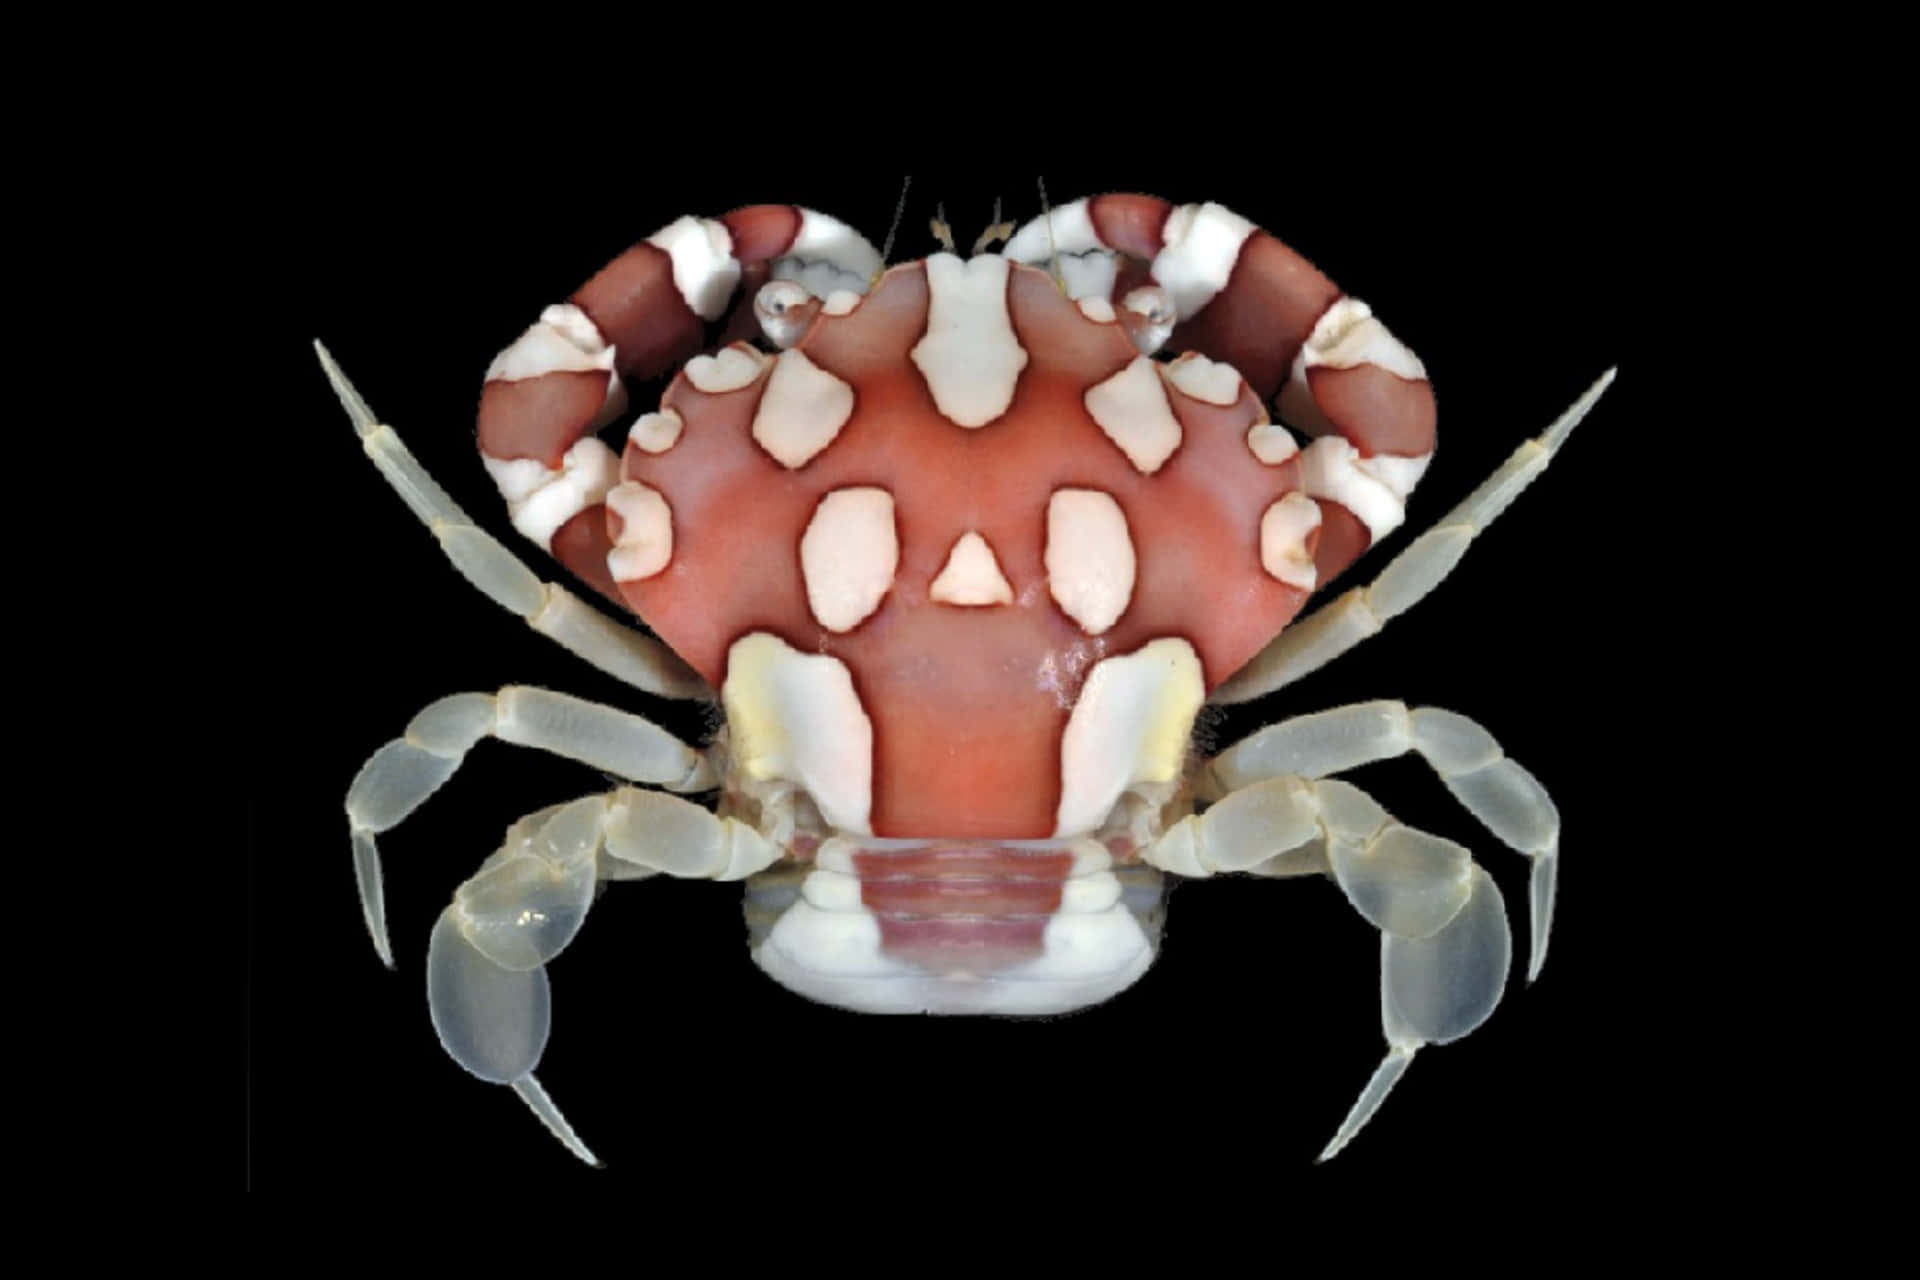 A Crab With Red And White Stripes On Its Body